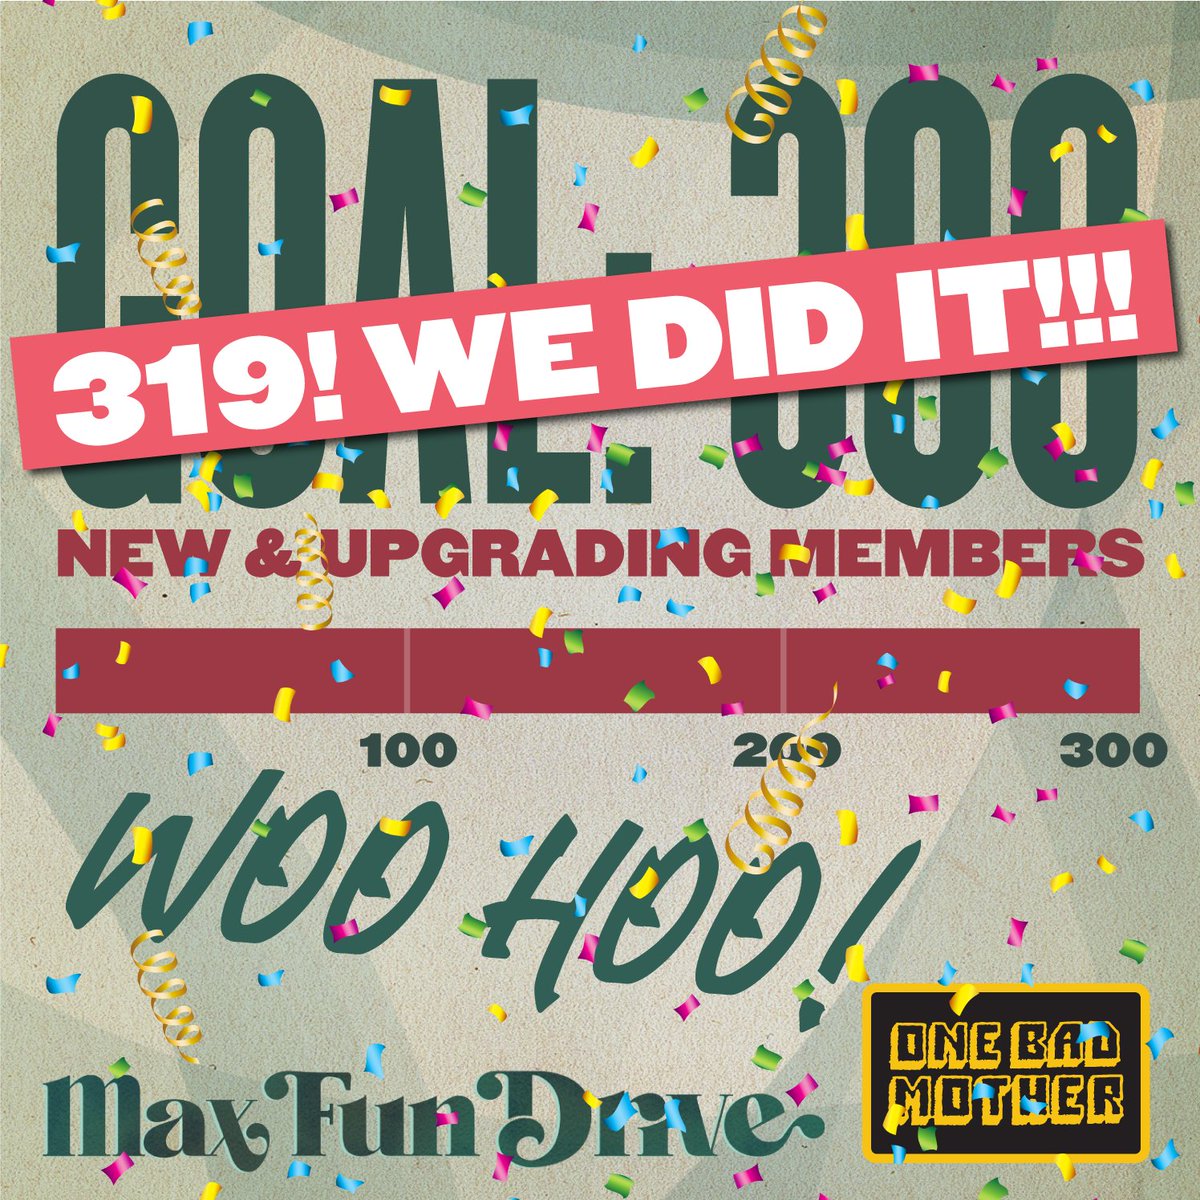 WE DID IT! YOU DID IT! Thank you so much! Your support has an impact on so many levels and I am so grateful for it. This also means we'll have our first official Virtual Low Bar Hangout THIS MONTH! I'll post a date soon! #MaxFunDrive